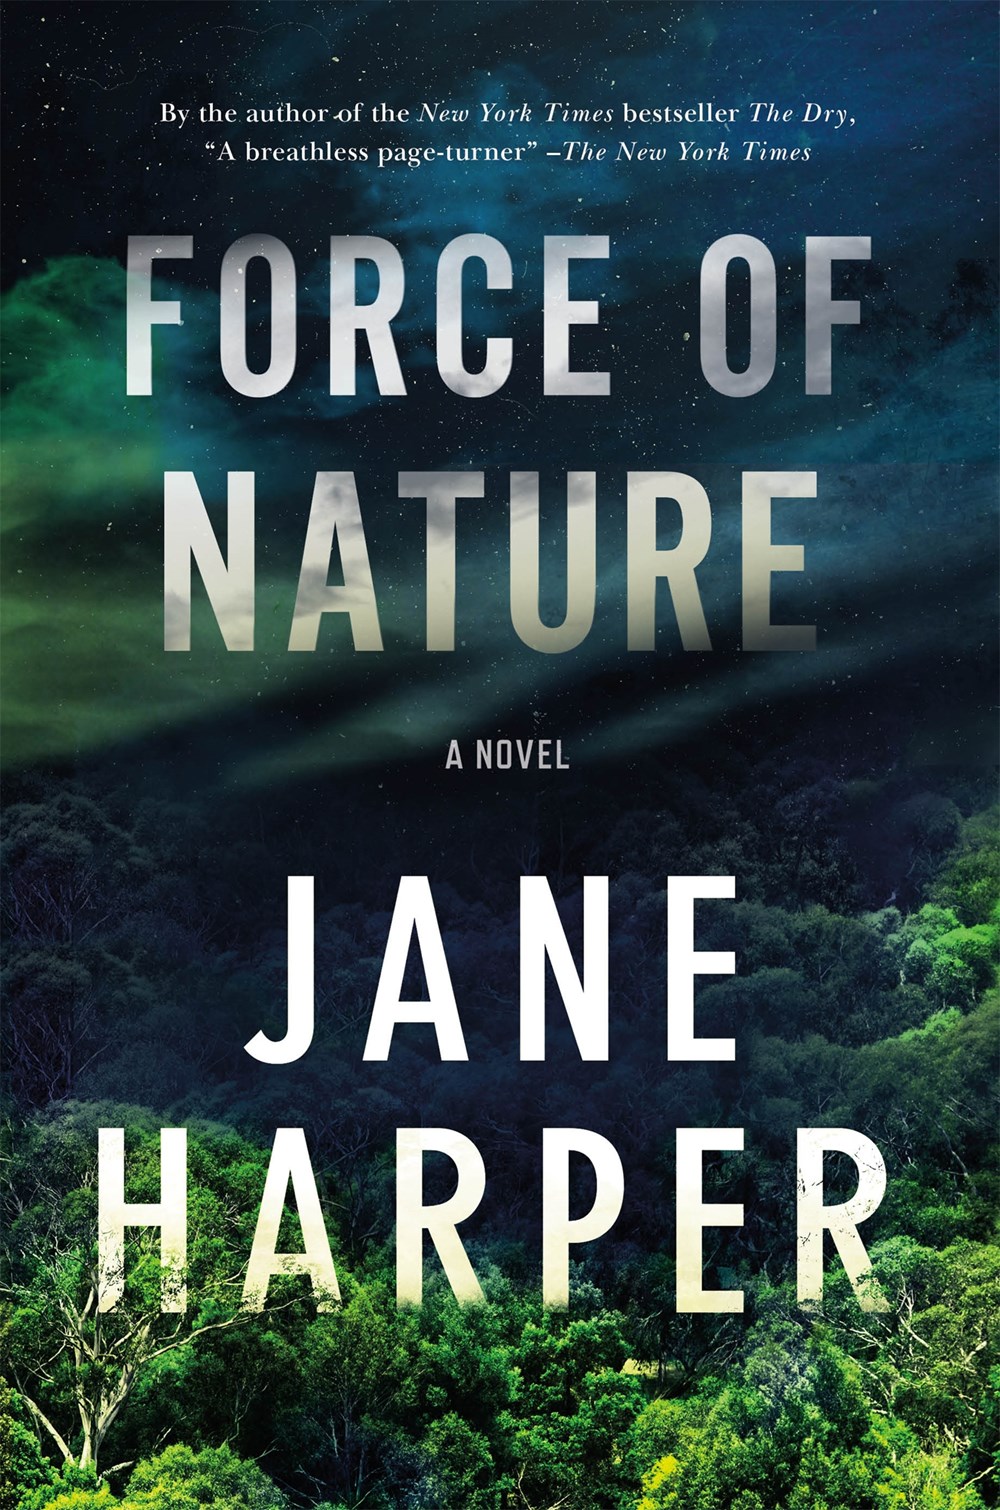 Beth Fish Reads: Today\u0026#39;s Read: Force of Nature by Jane Harper